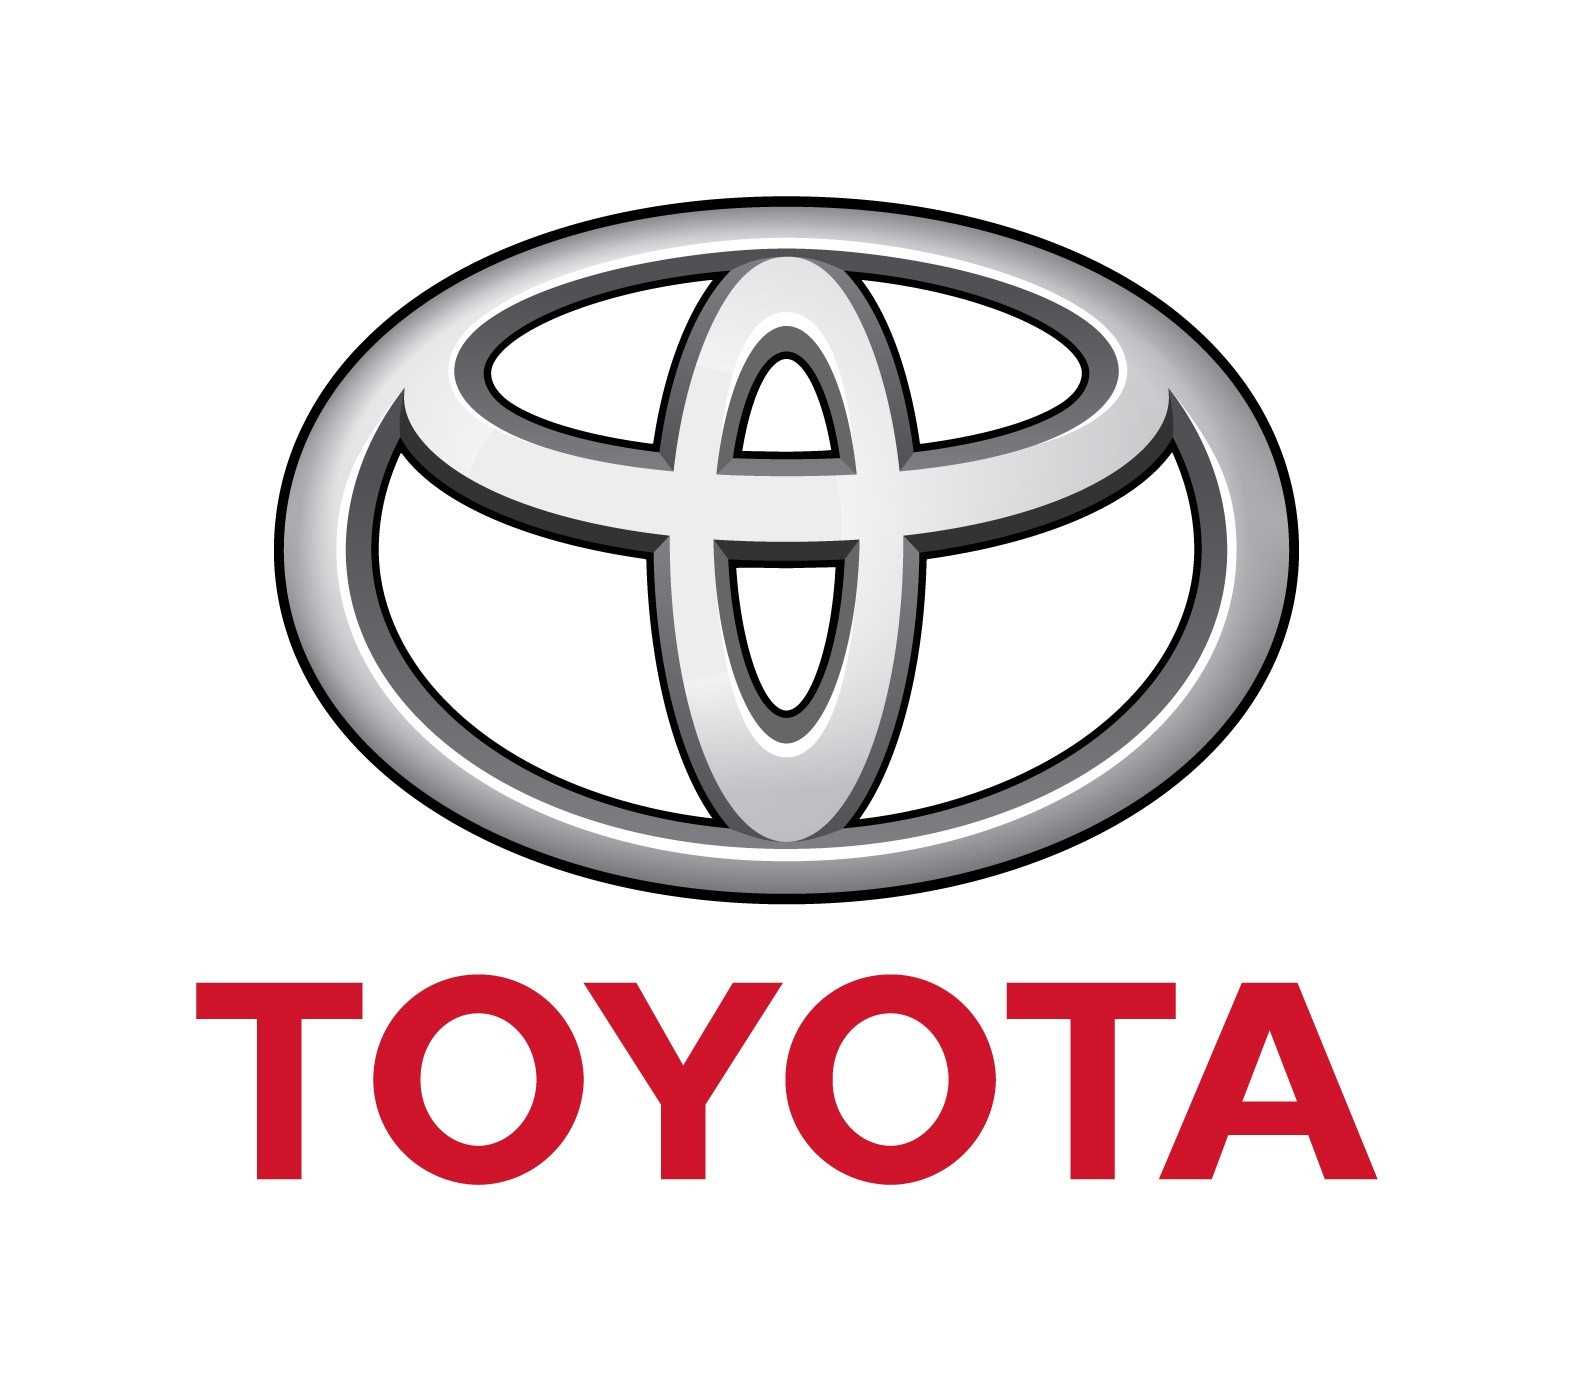 Pre-Owned Toyota Cars for Sale in St. Peters